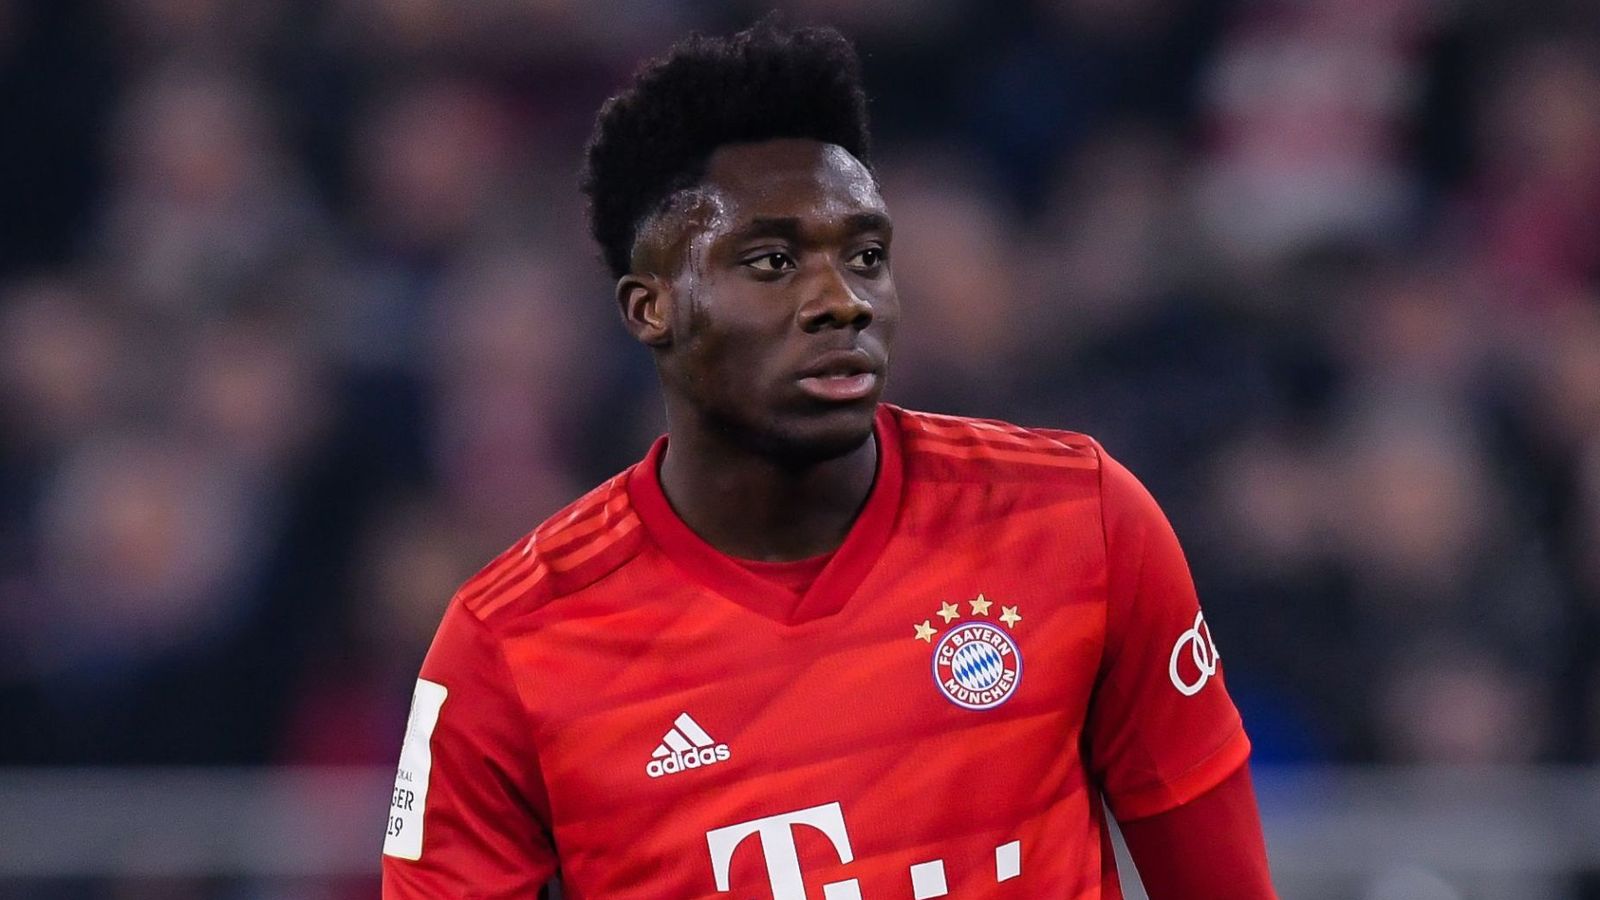  Alphonso Davies, a Bayern Munich player, looking intensely while playing soccer during a game.